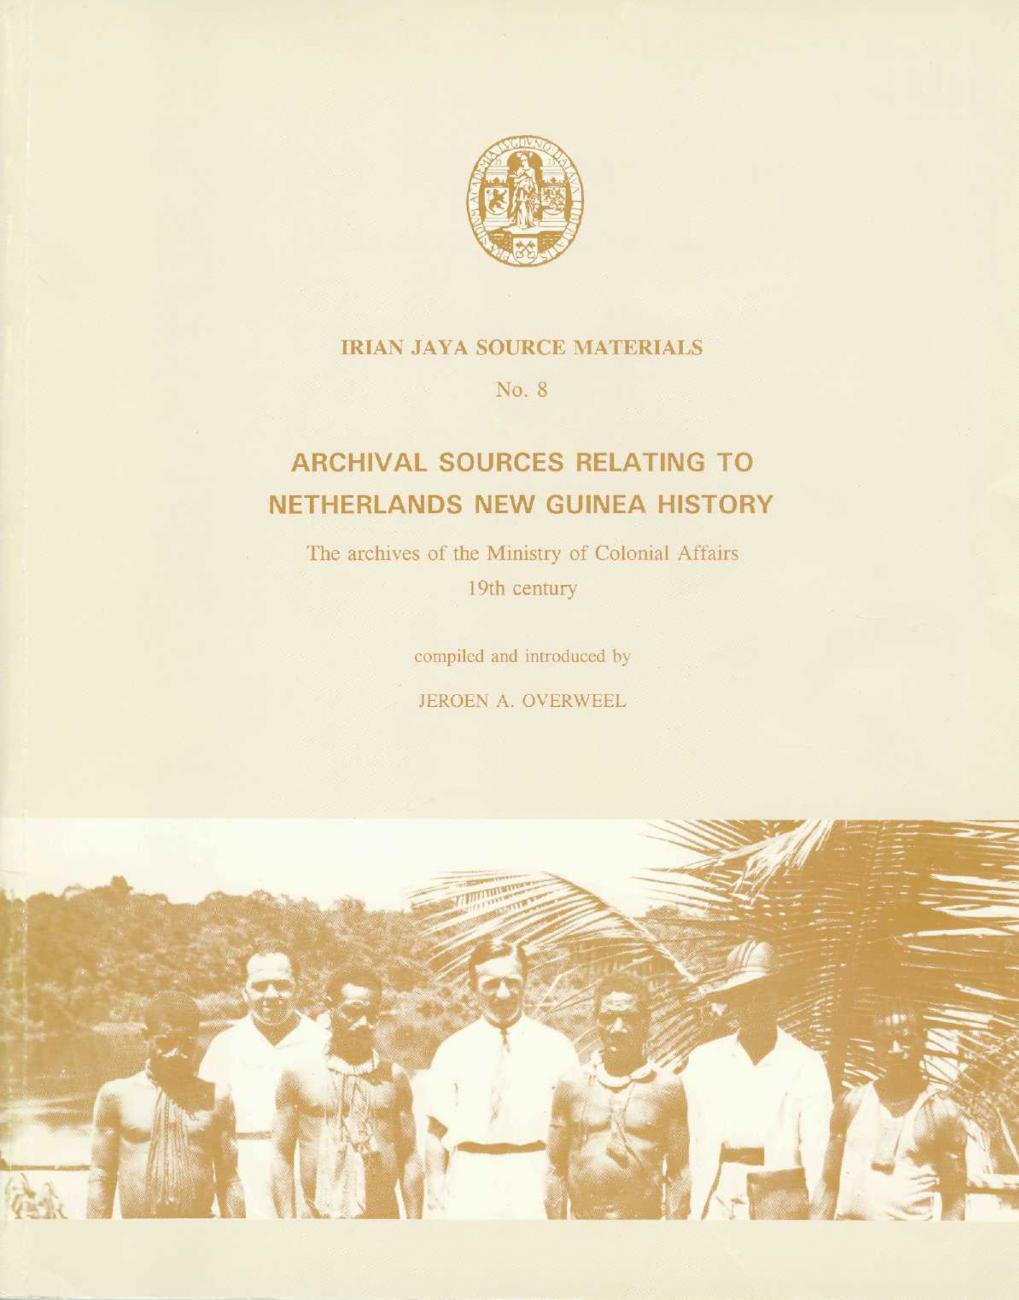 BK/151/56 - 
Archival sources relating to Netherlands New Guinea history (the archives of the Ministry of Colonial Affairs 19th century)
